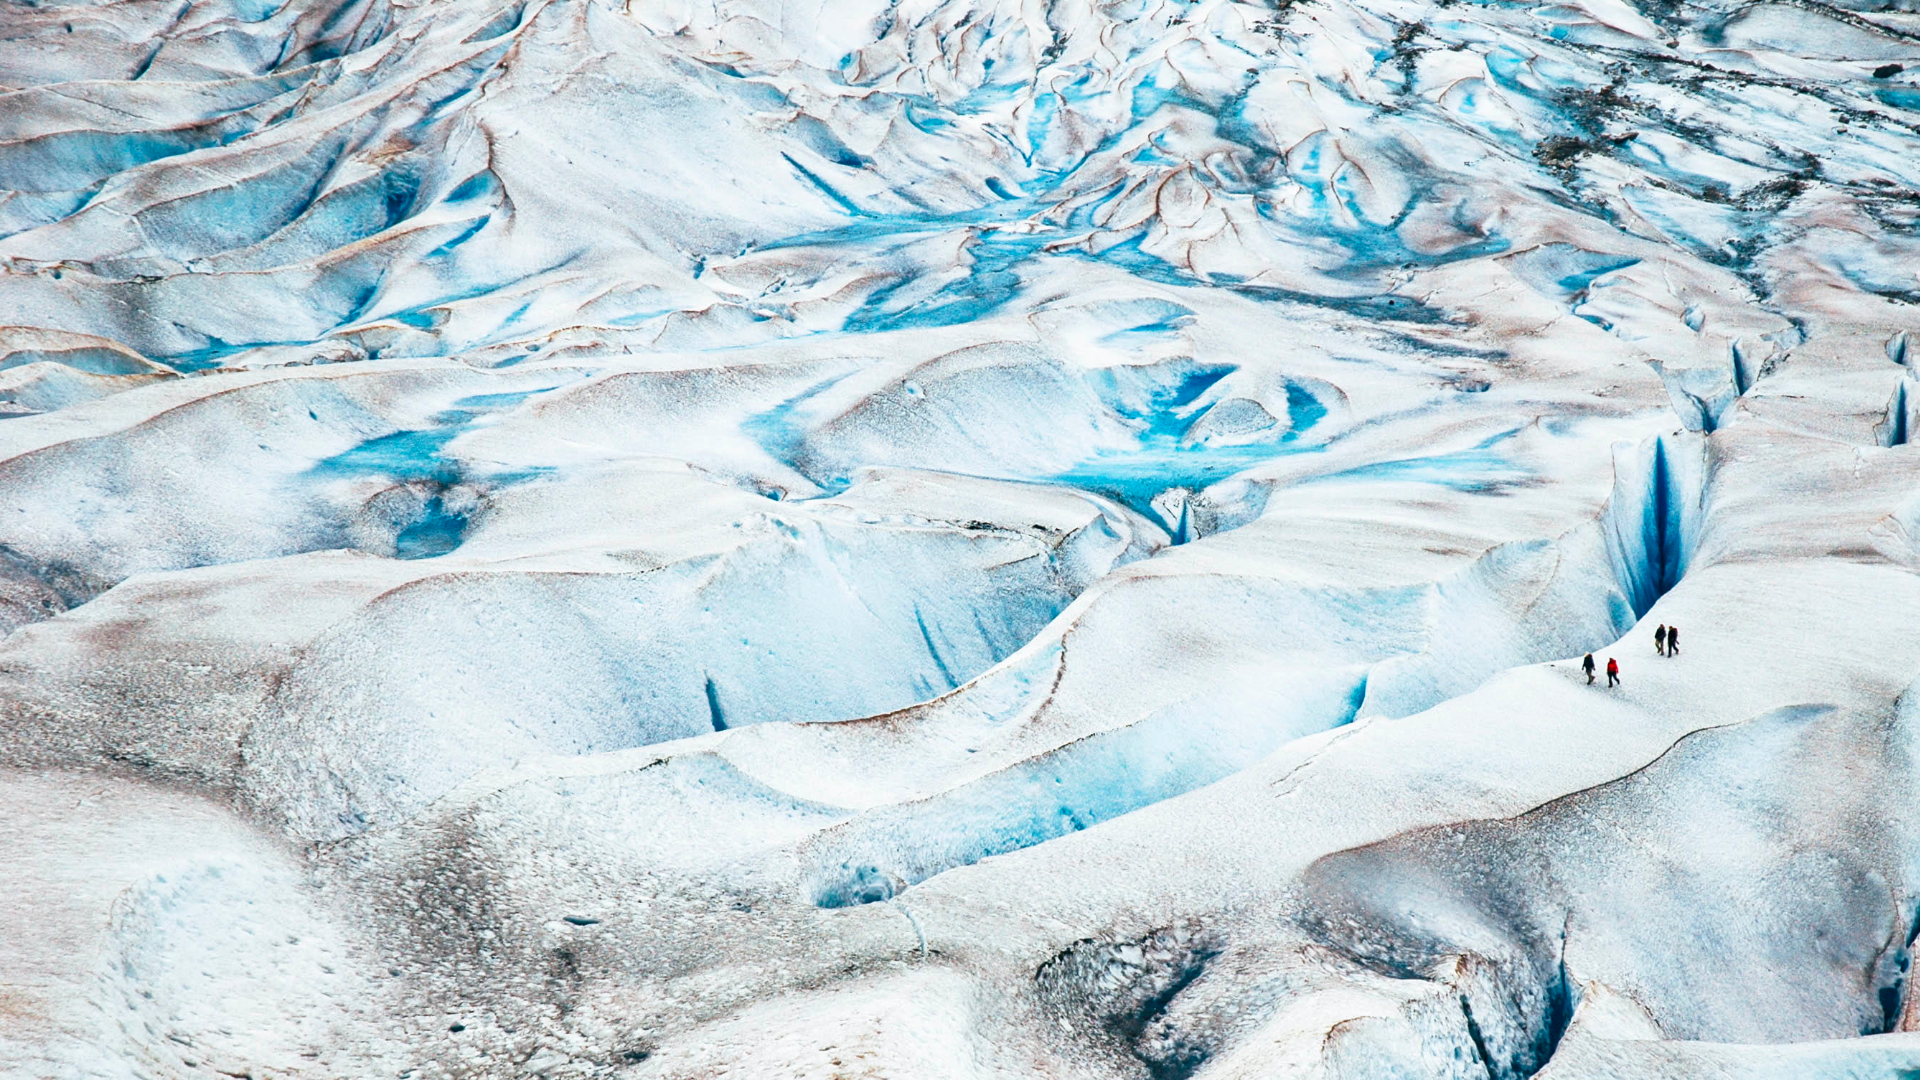 Melting glaciers caused by the climate crisis are leading to shifts in the Earth’s axis. Image credit: Piqsels